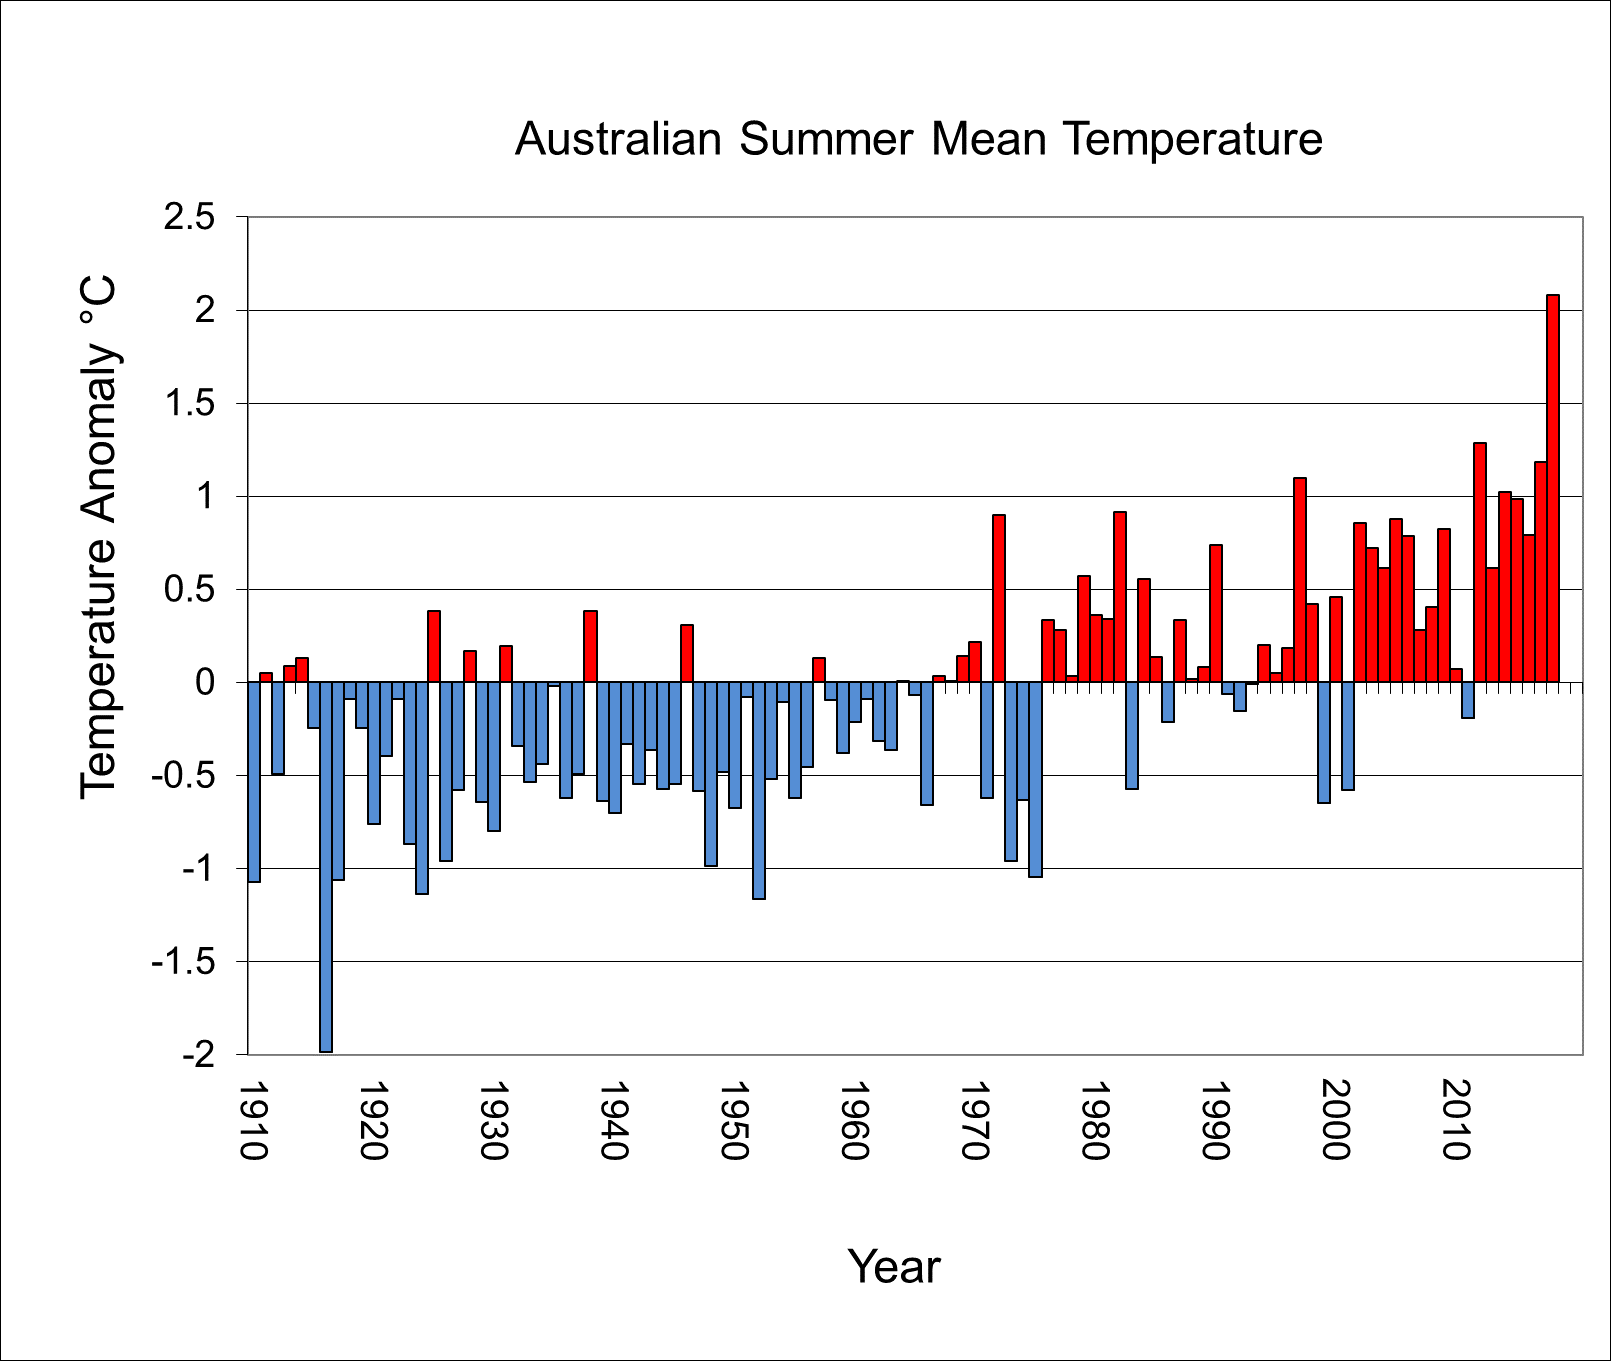 Summer mean average temperature variation from average from 1910 to the present, showing years where the temperature was greater than average are greatly more prevalent in the second half of the period, and the current year is the highest of all.